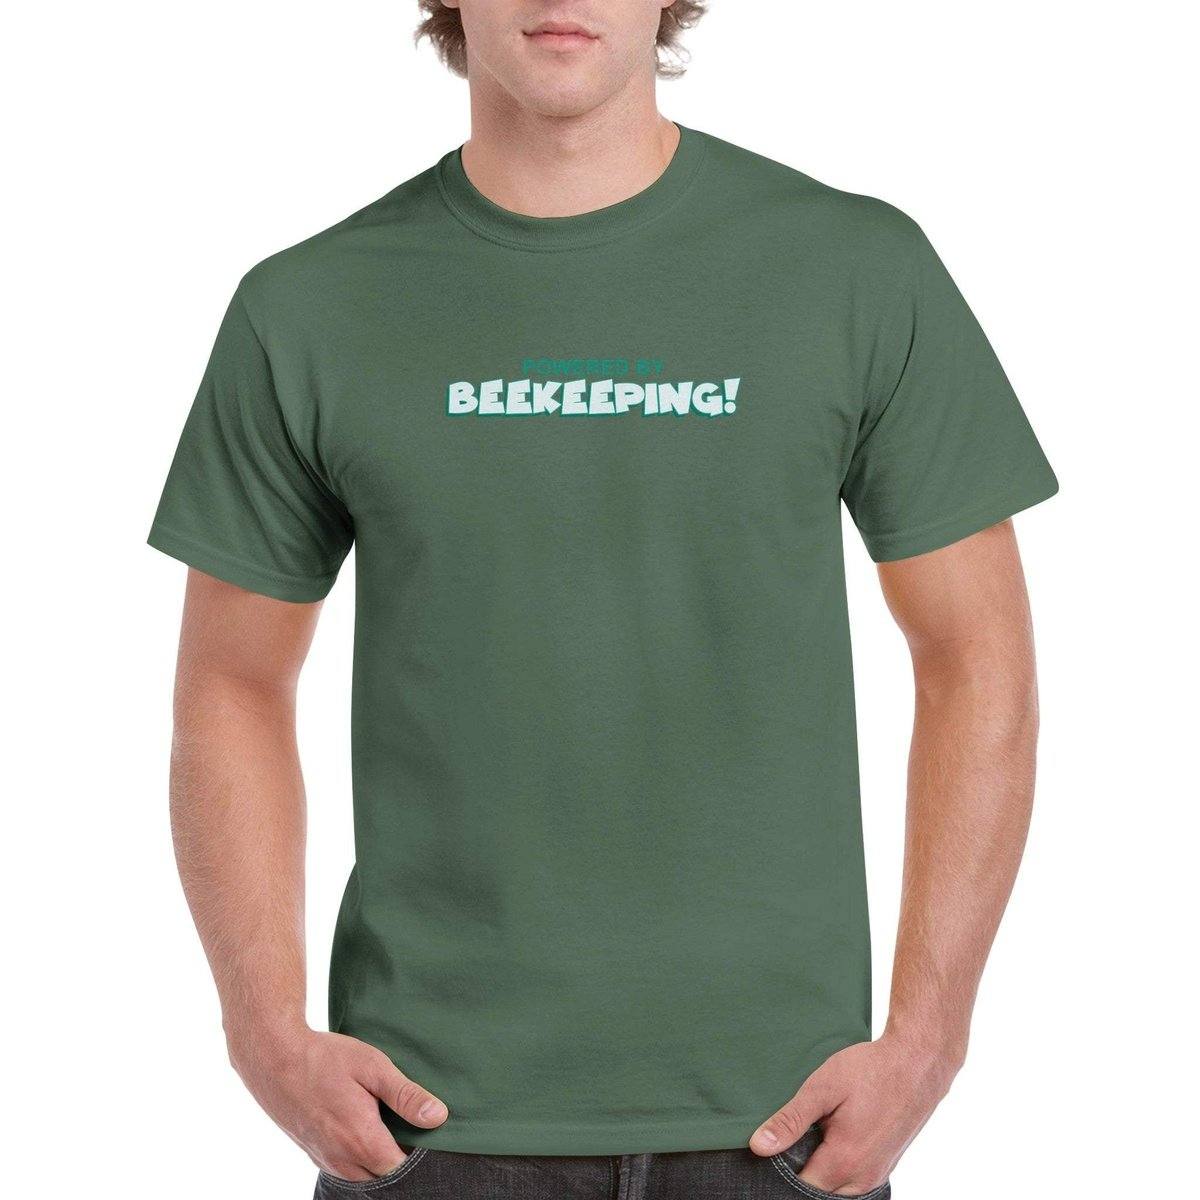 Powered By Beekeeping T-Shirt - funny beekeeper Tshirt - Unisex Crewneck T-shirt Australia Online Color Military Green / S